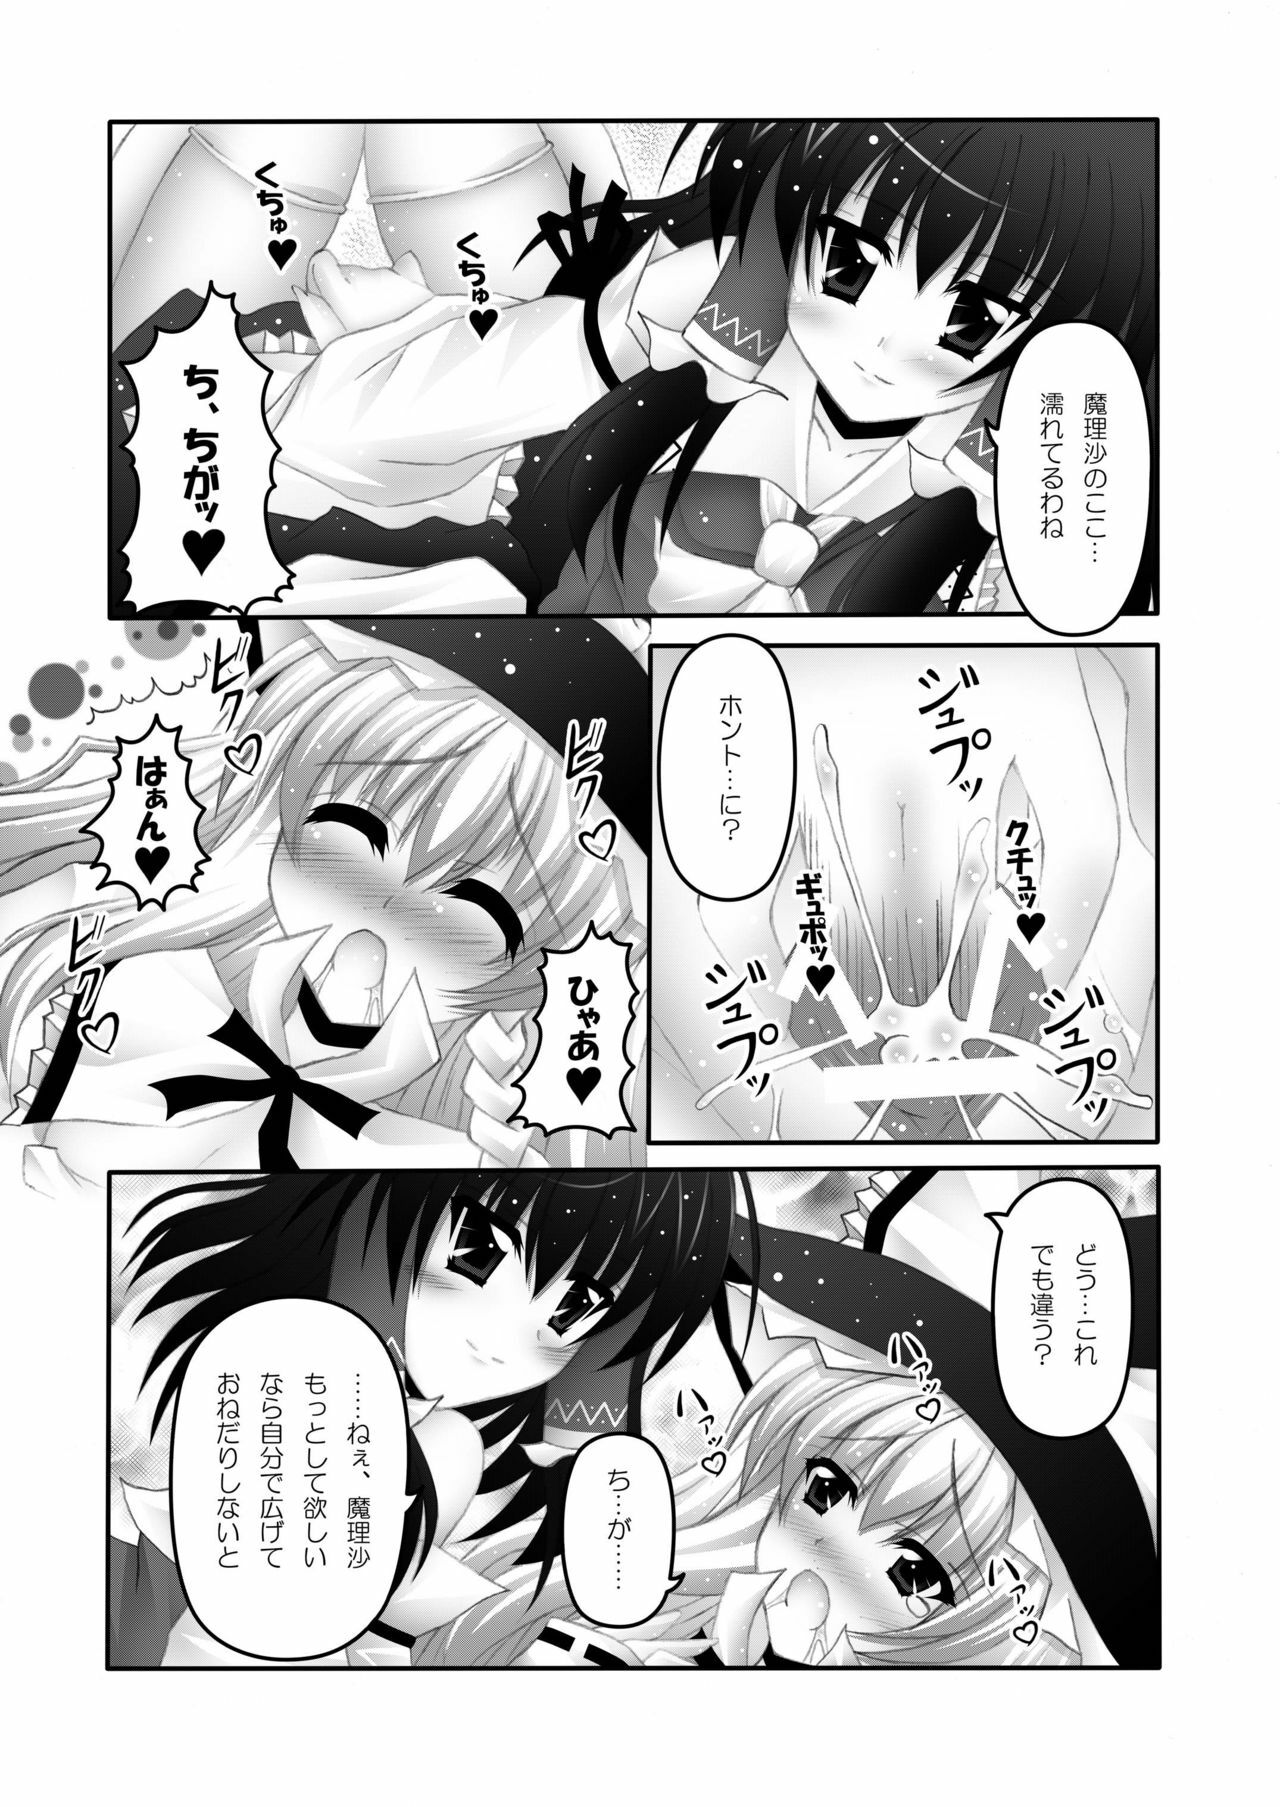 [Chronicle (YUKITO)] Only my wizard (Touhou Project) [Digital] page 23 full